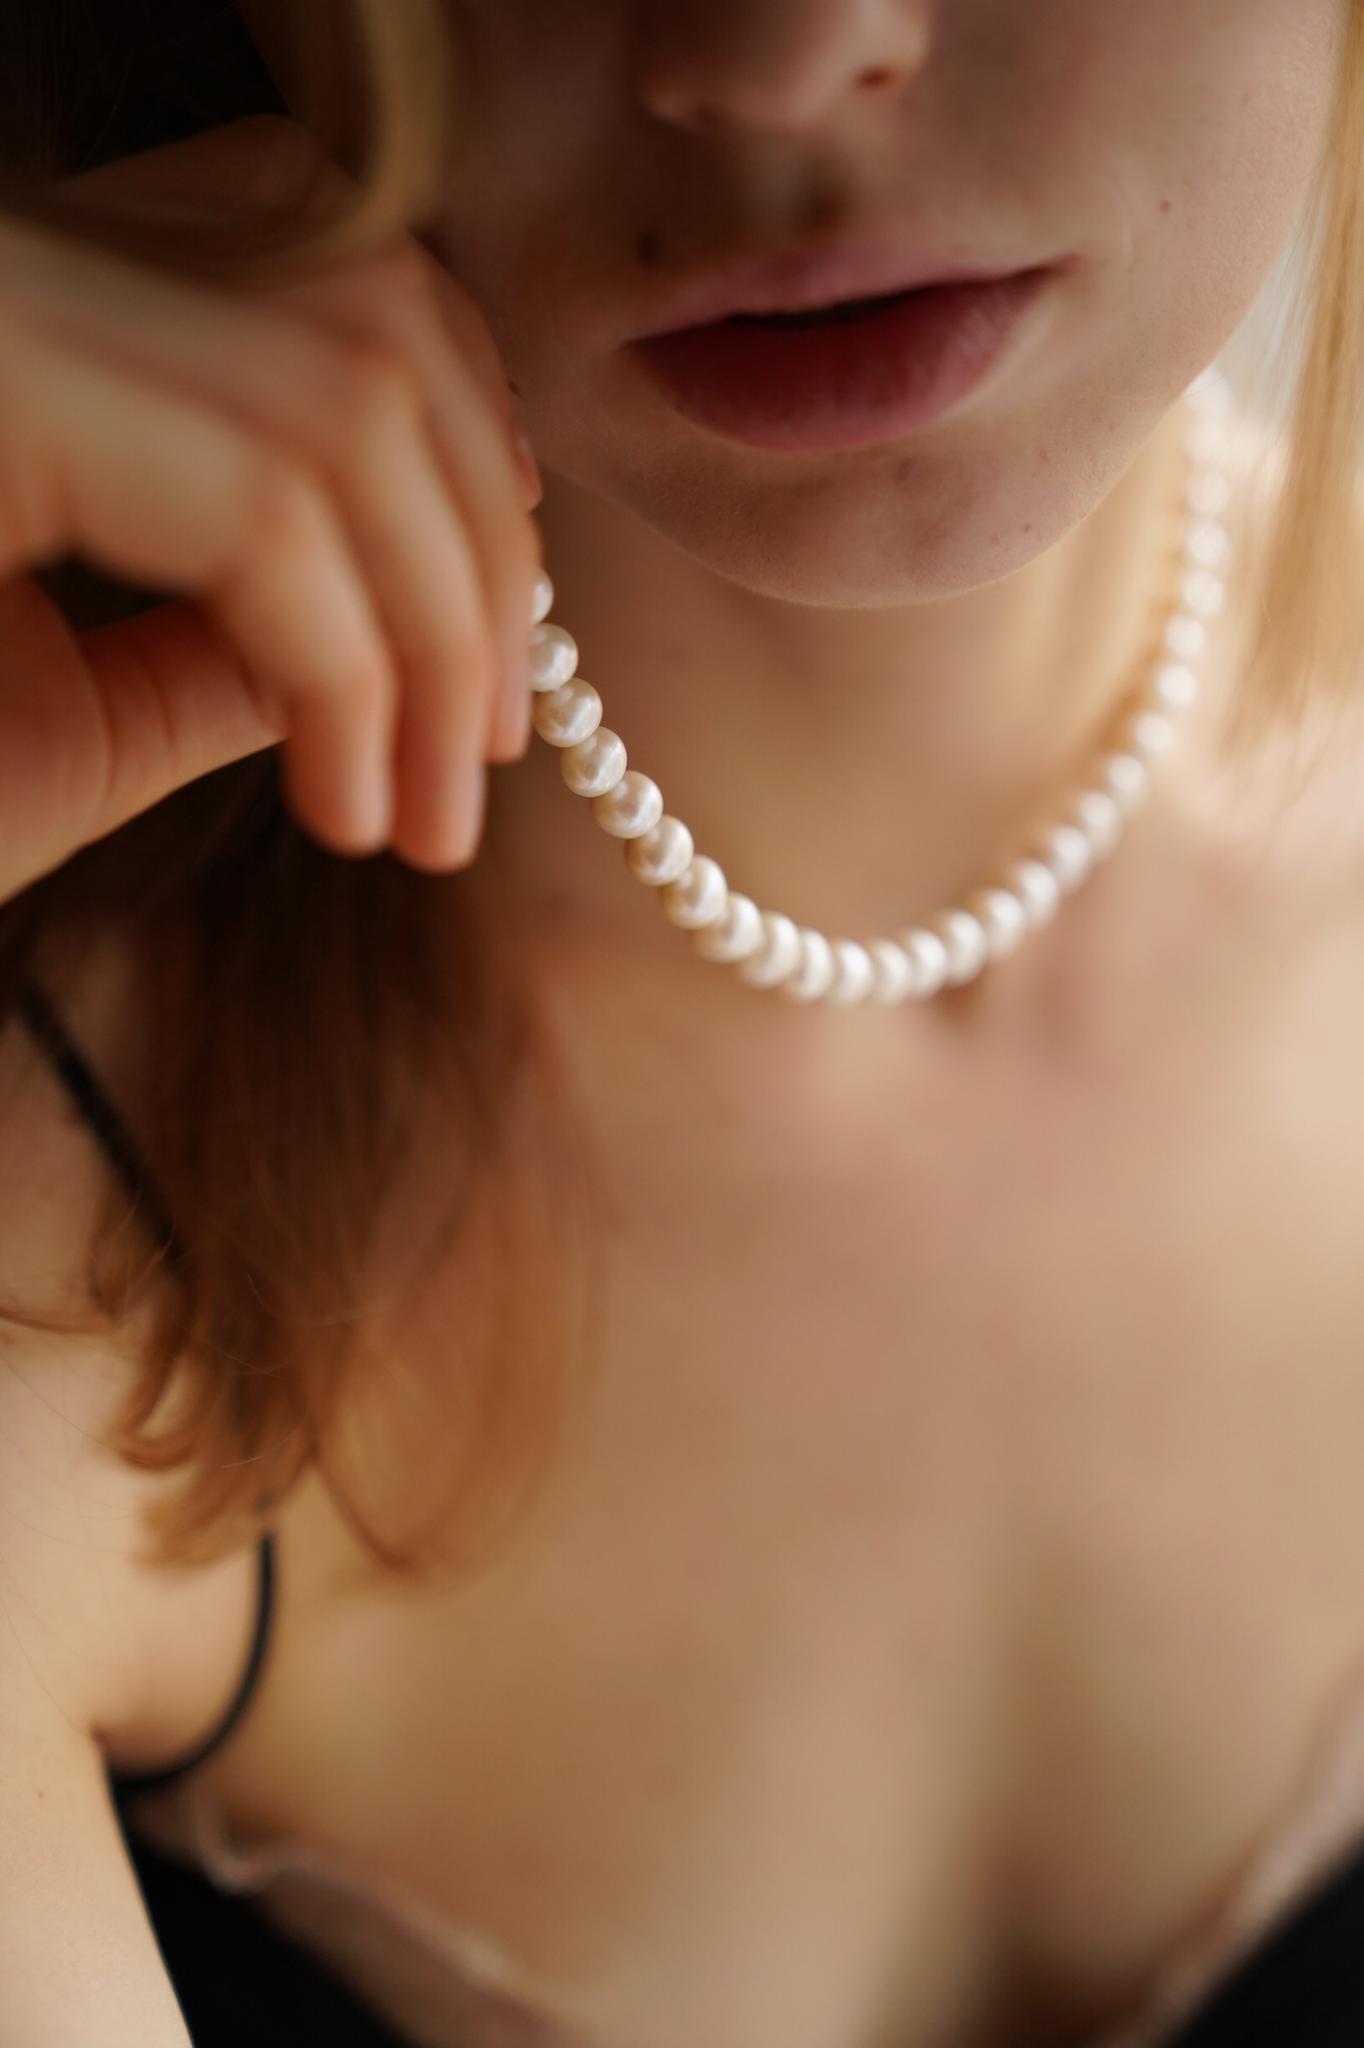 Natural Pearls Set: Earrings, Bracelet and Necklace